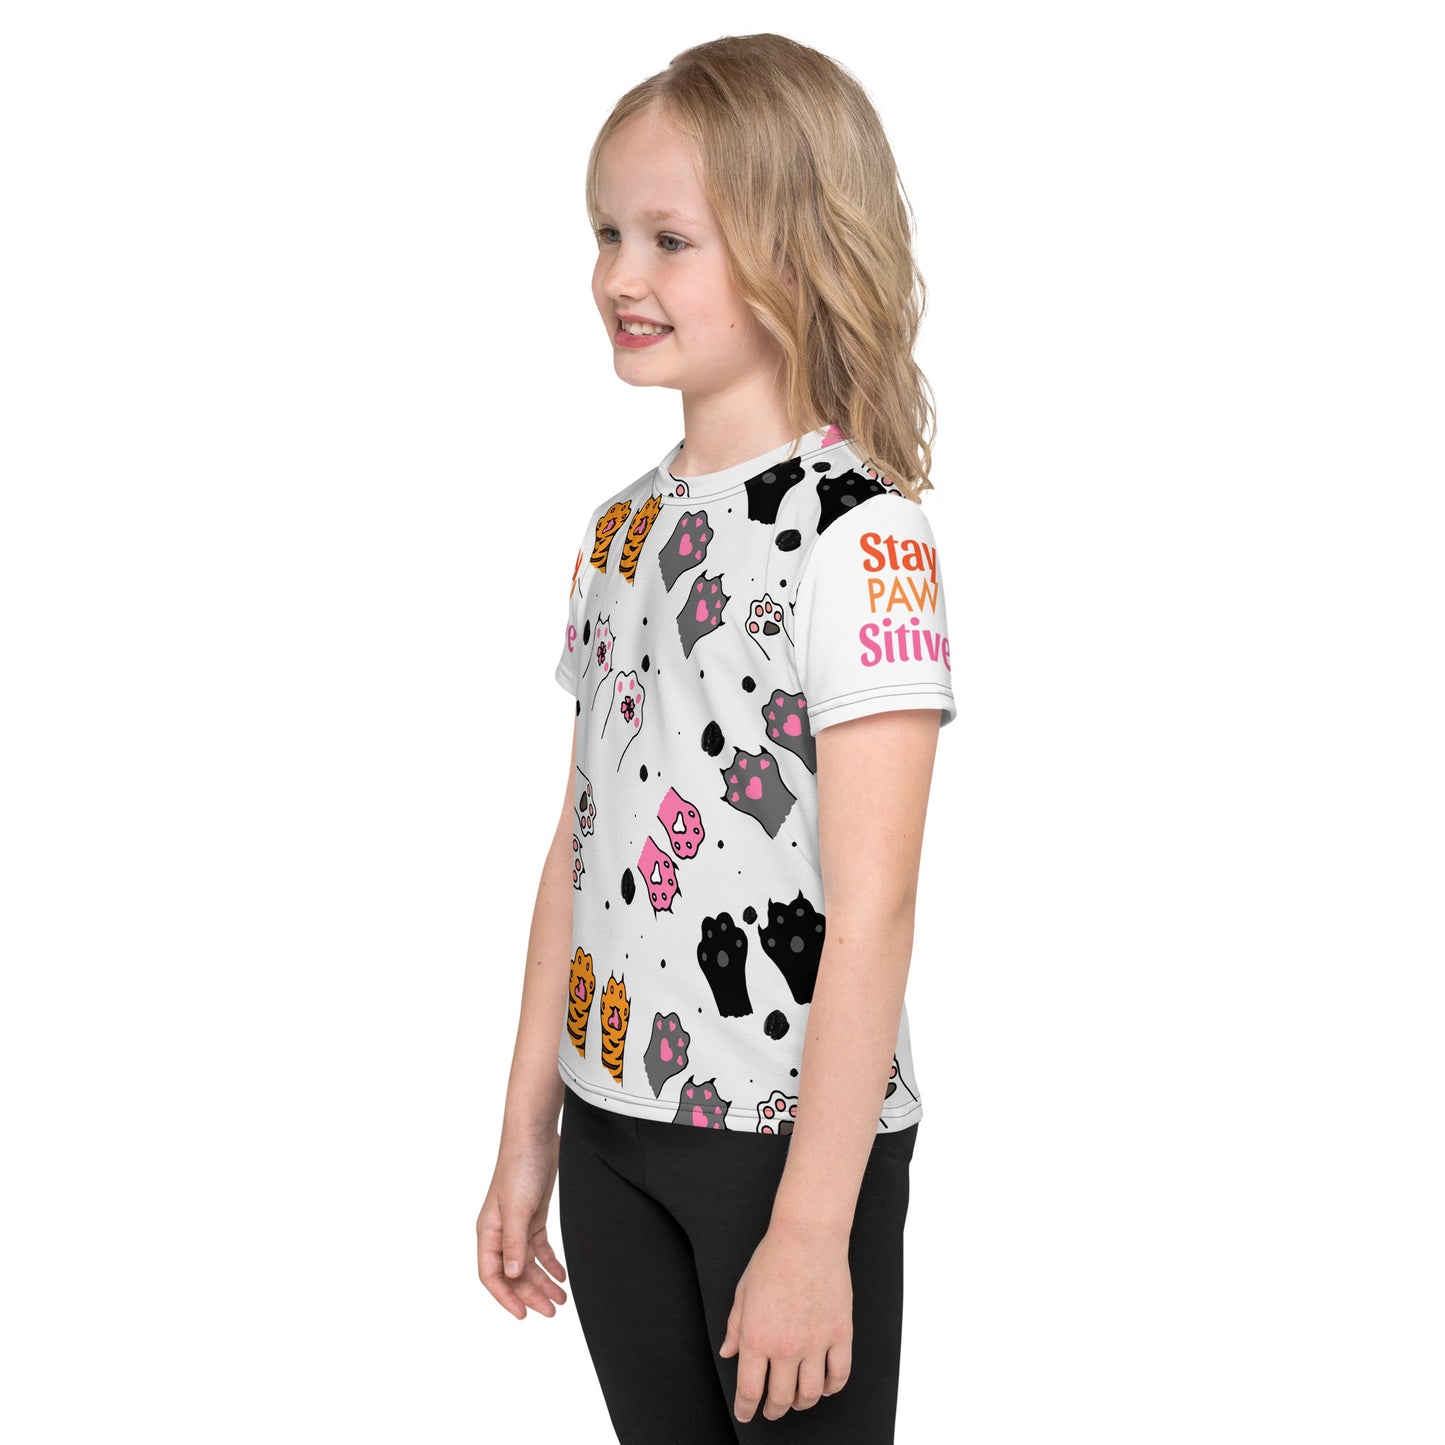 "Stay Paw-sitive" Kids T-shirt